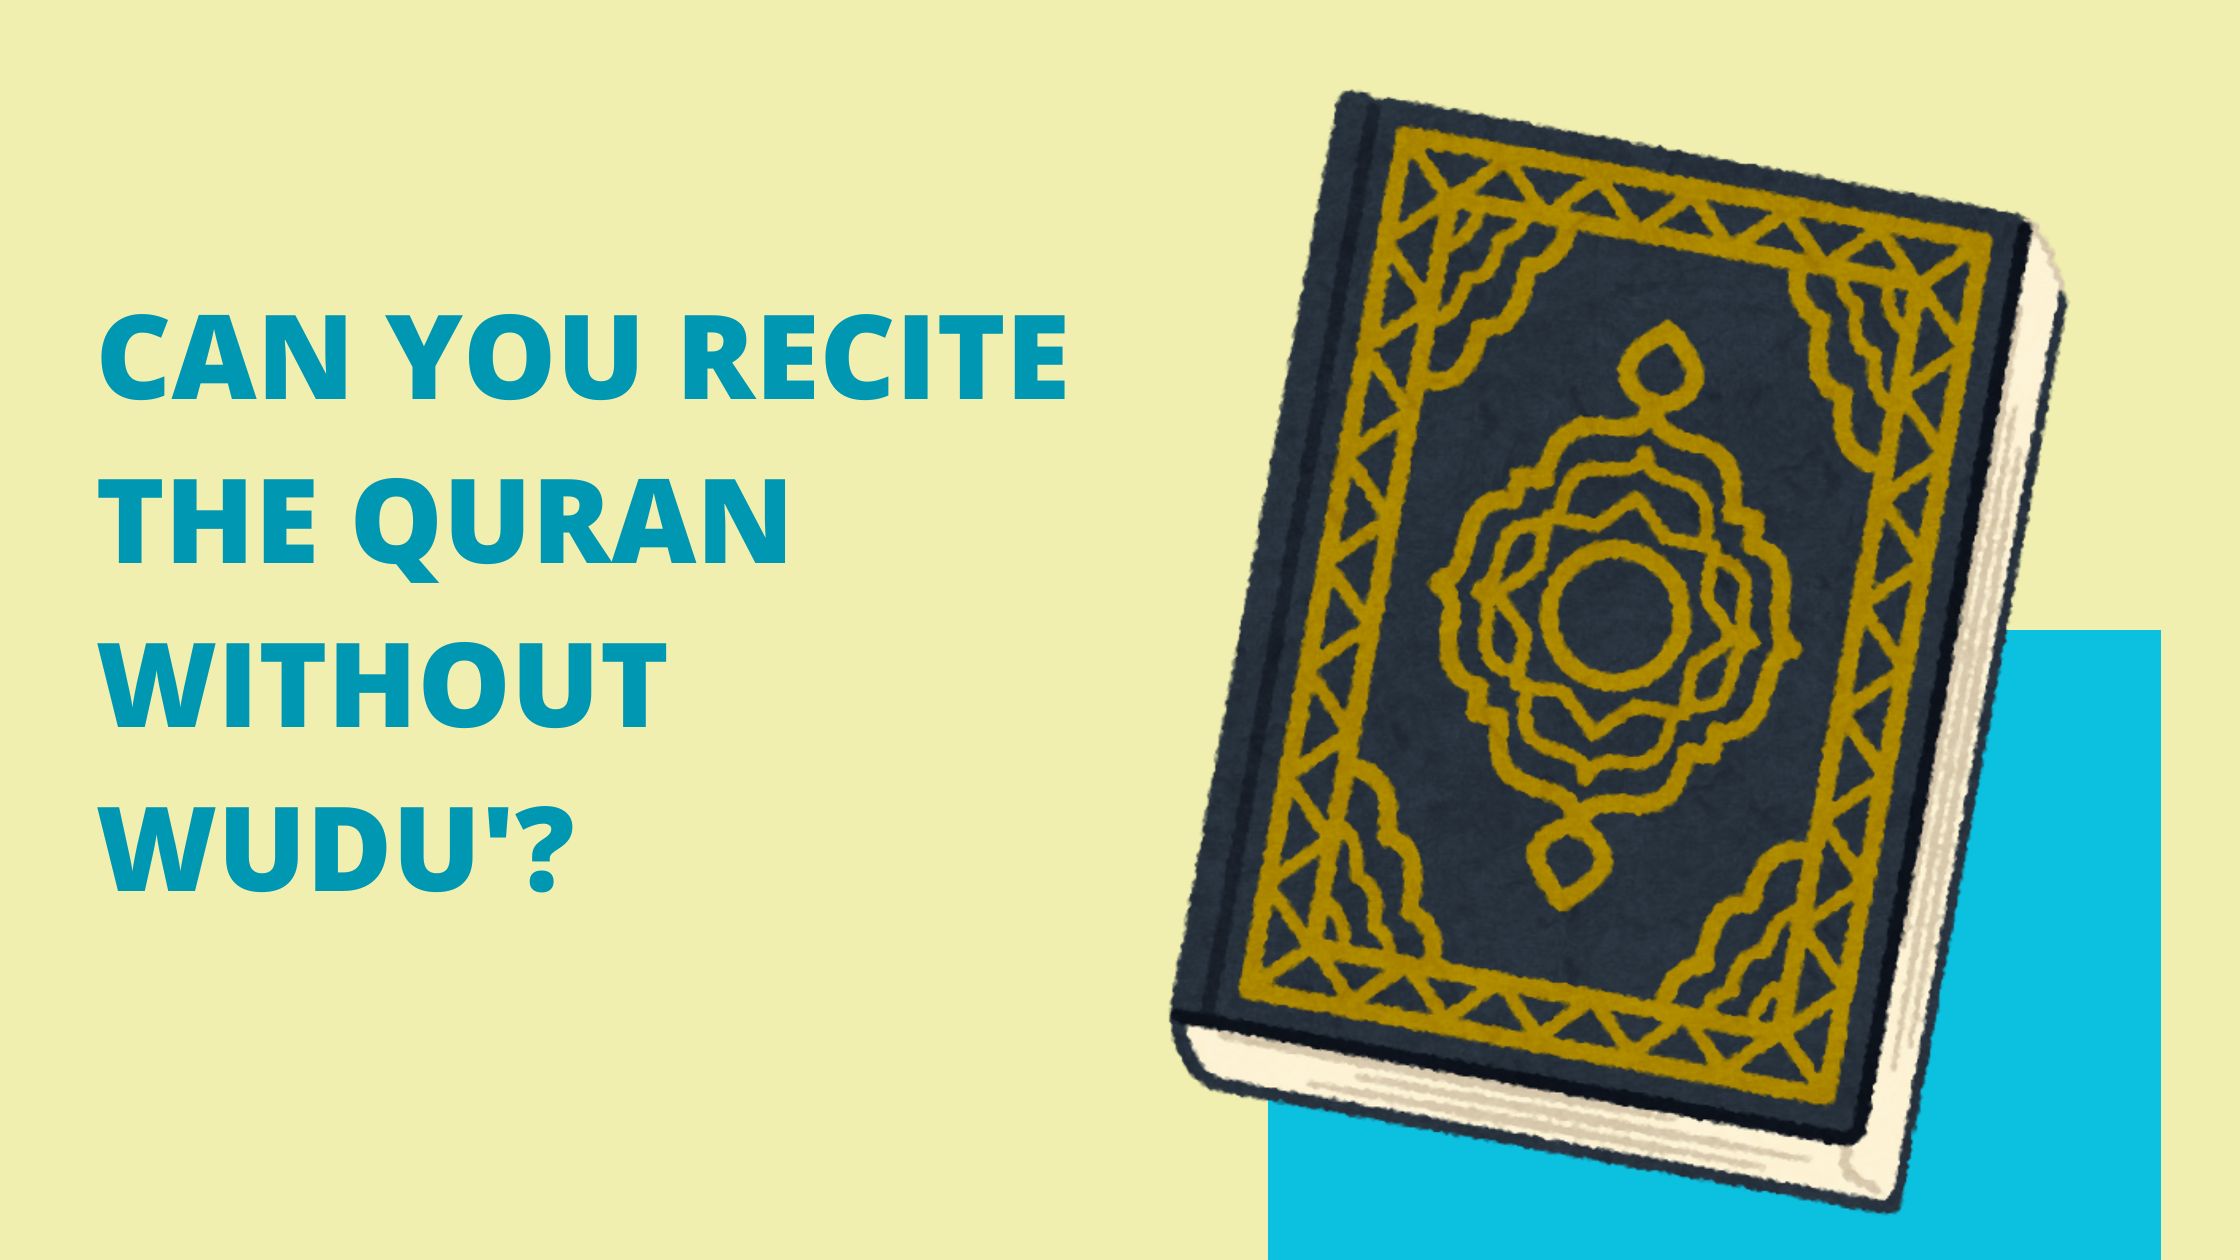 Can You Recite The Quran Without Wudu'